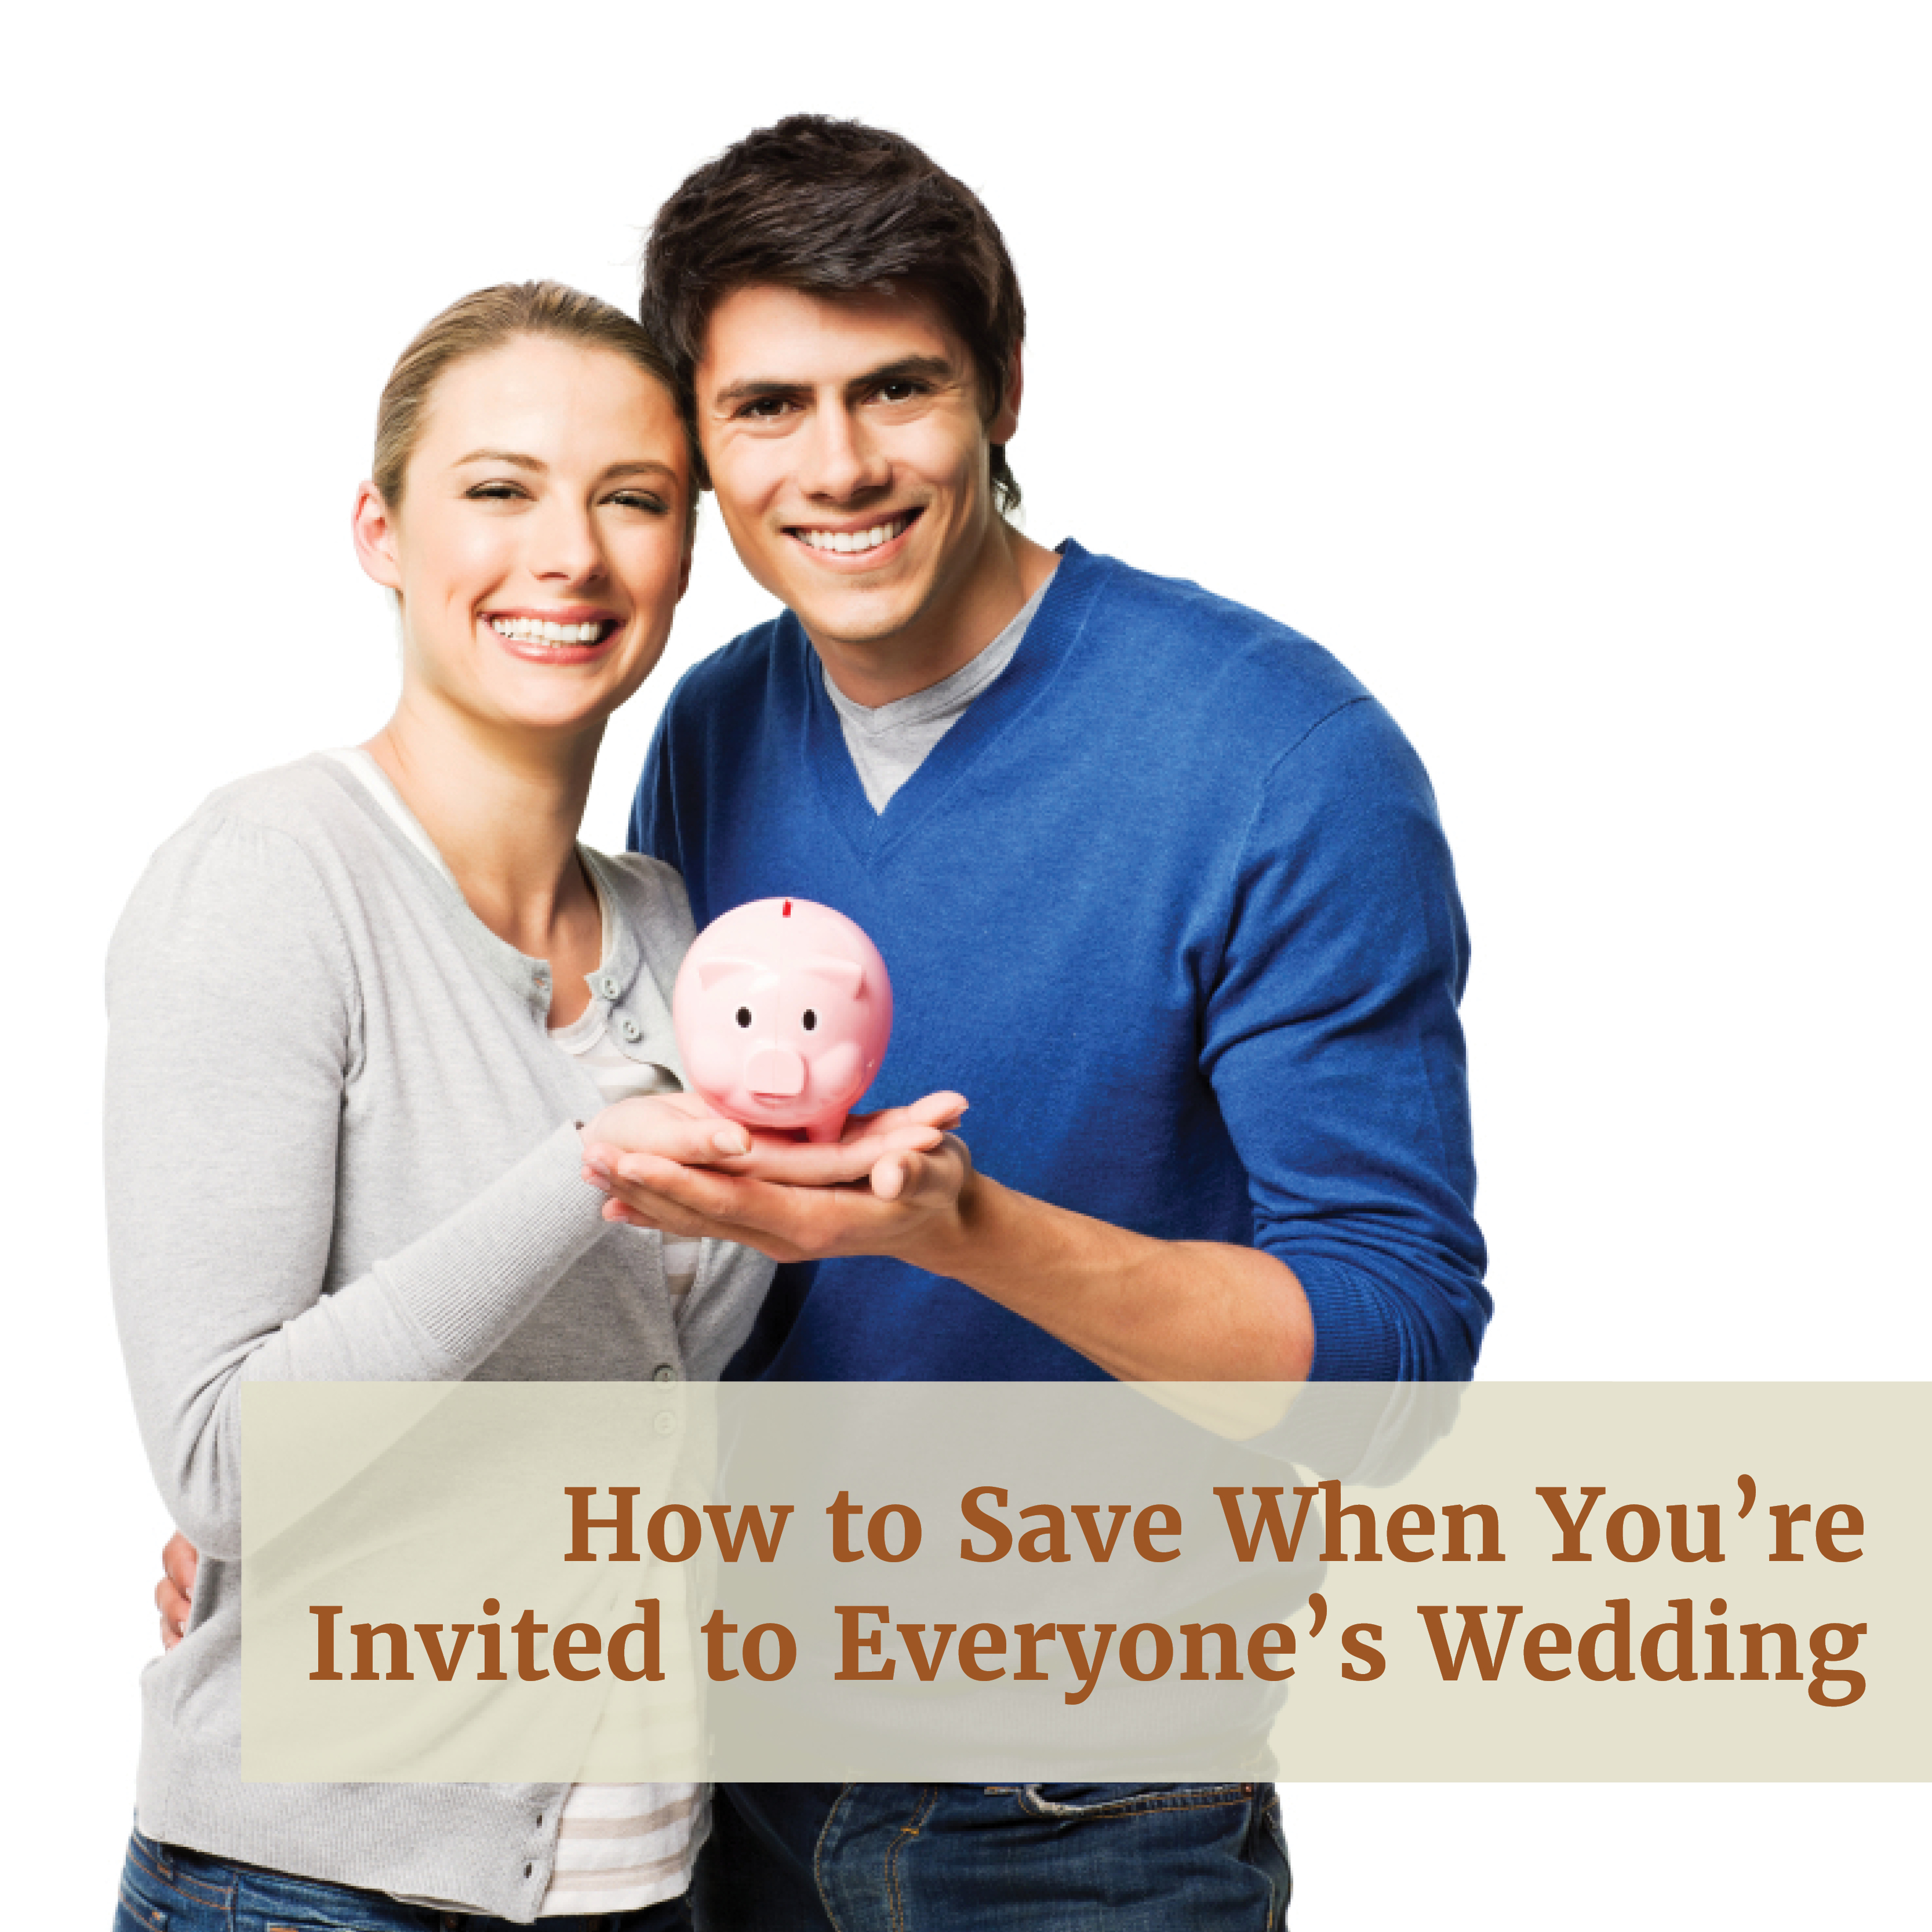 How to save when you're invited to everyone's wedding